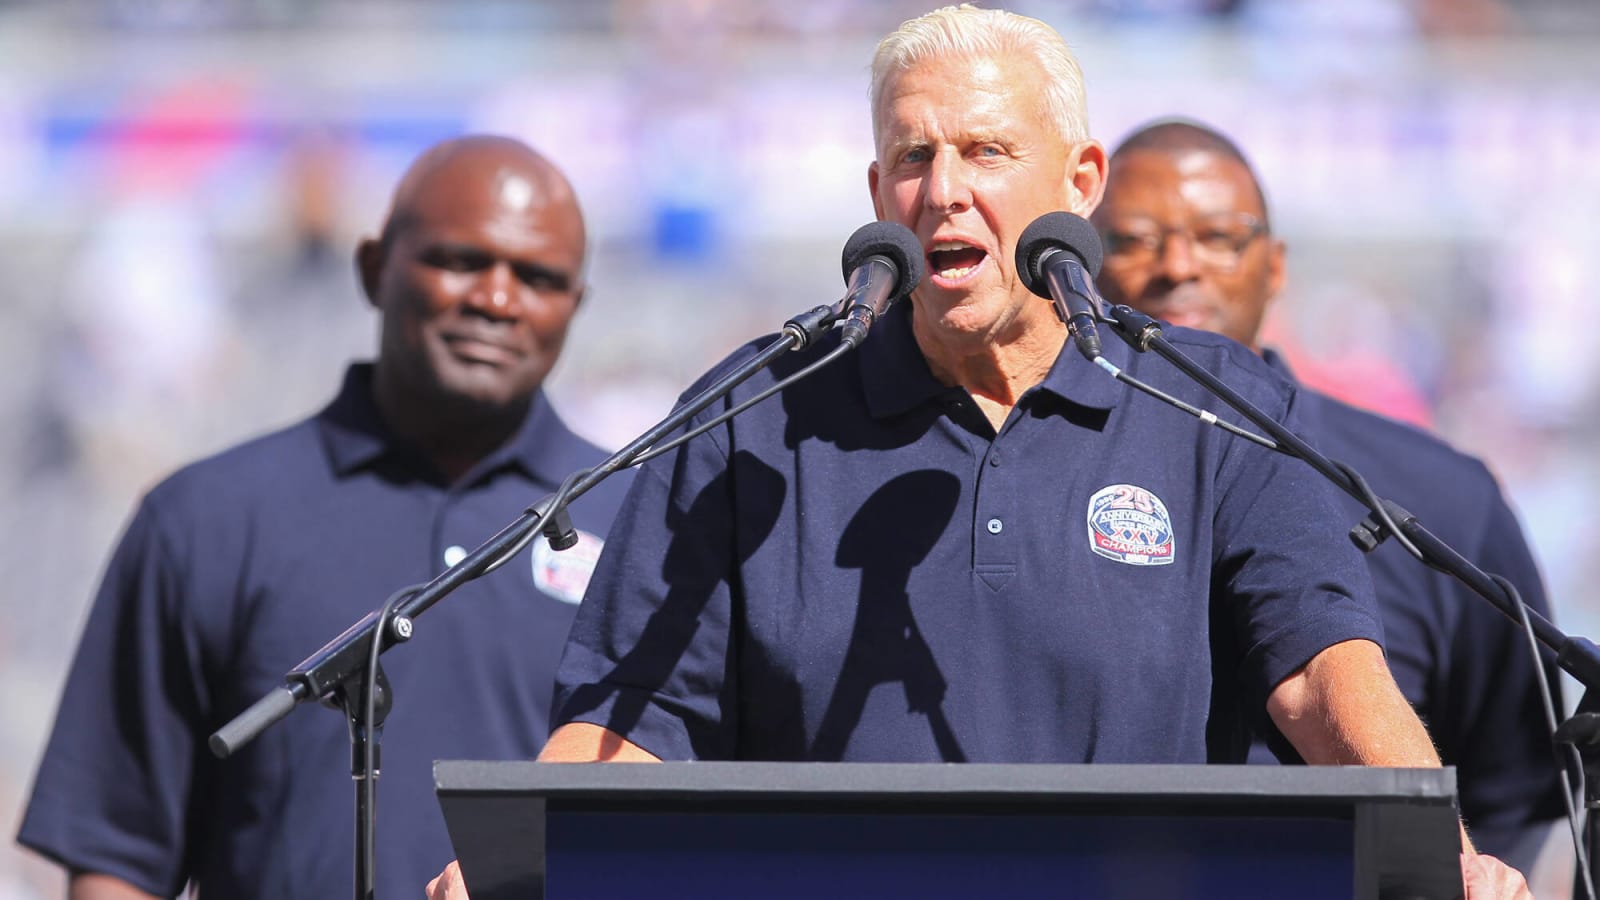 The Parcells Era begins in 2003